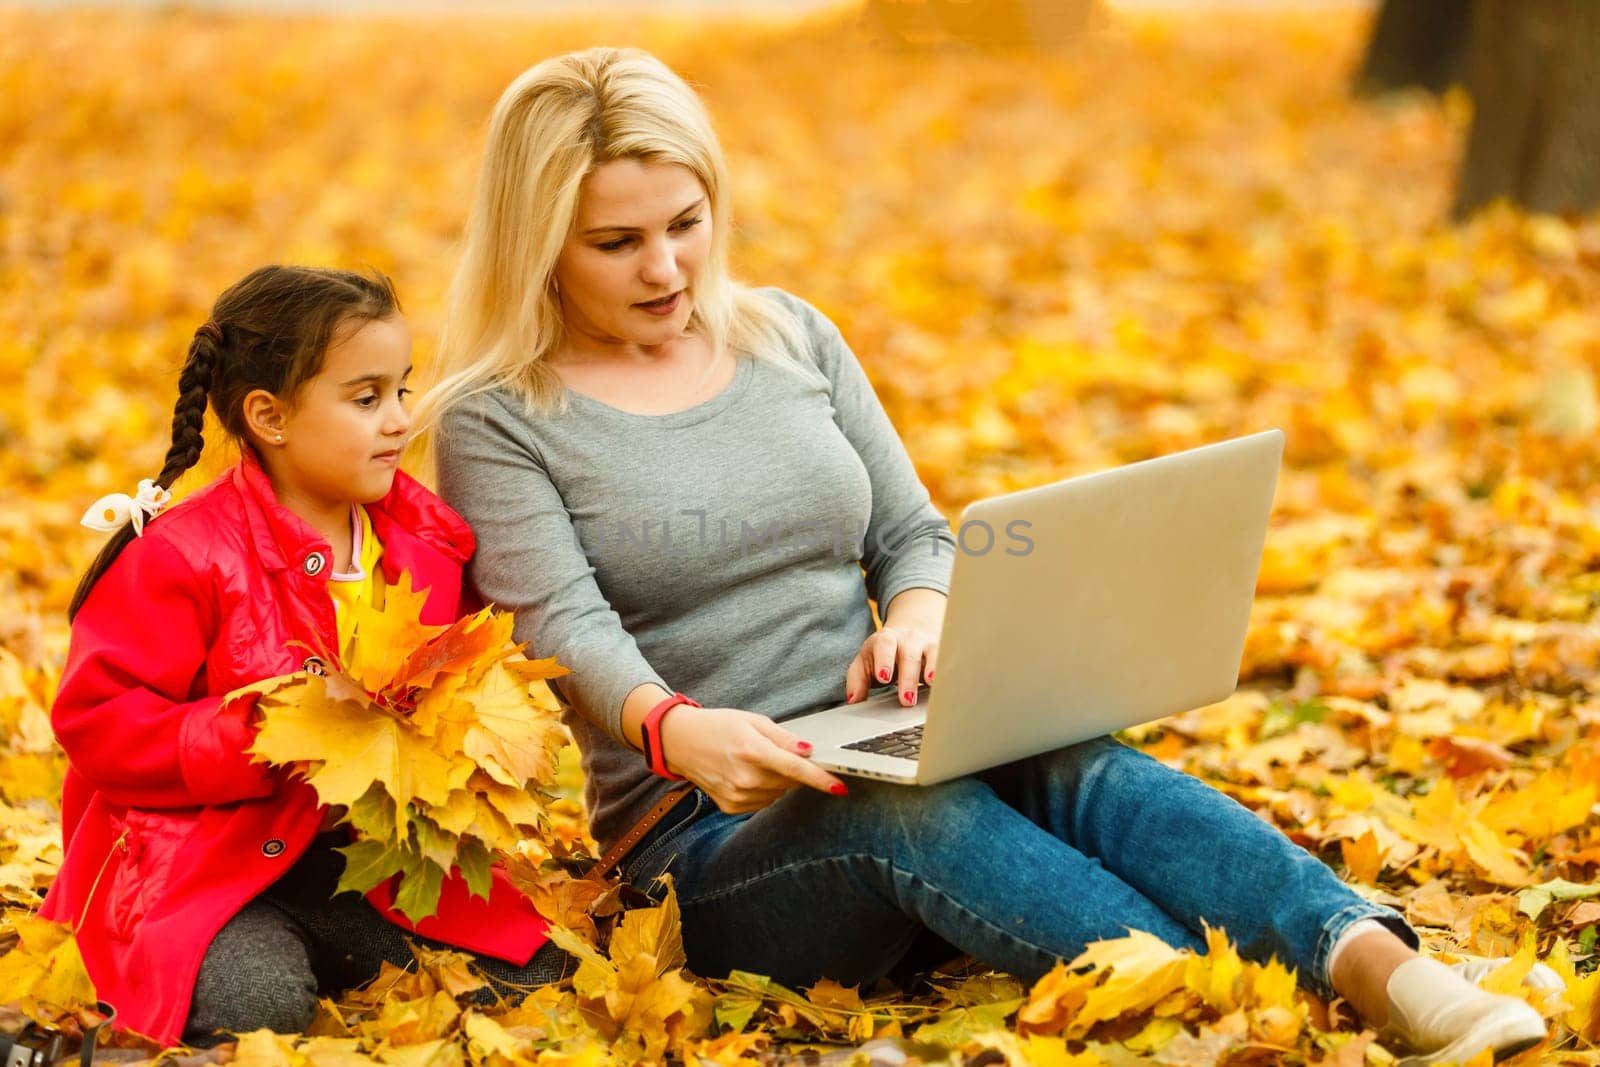 mother and daughter work on laptop outside in autumn. by Andelov13